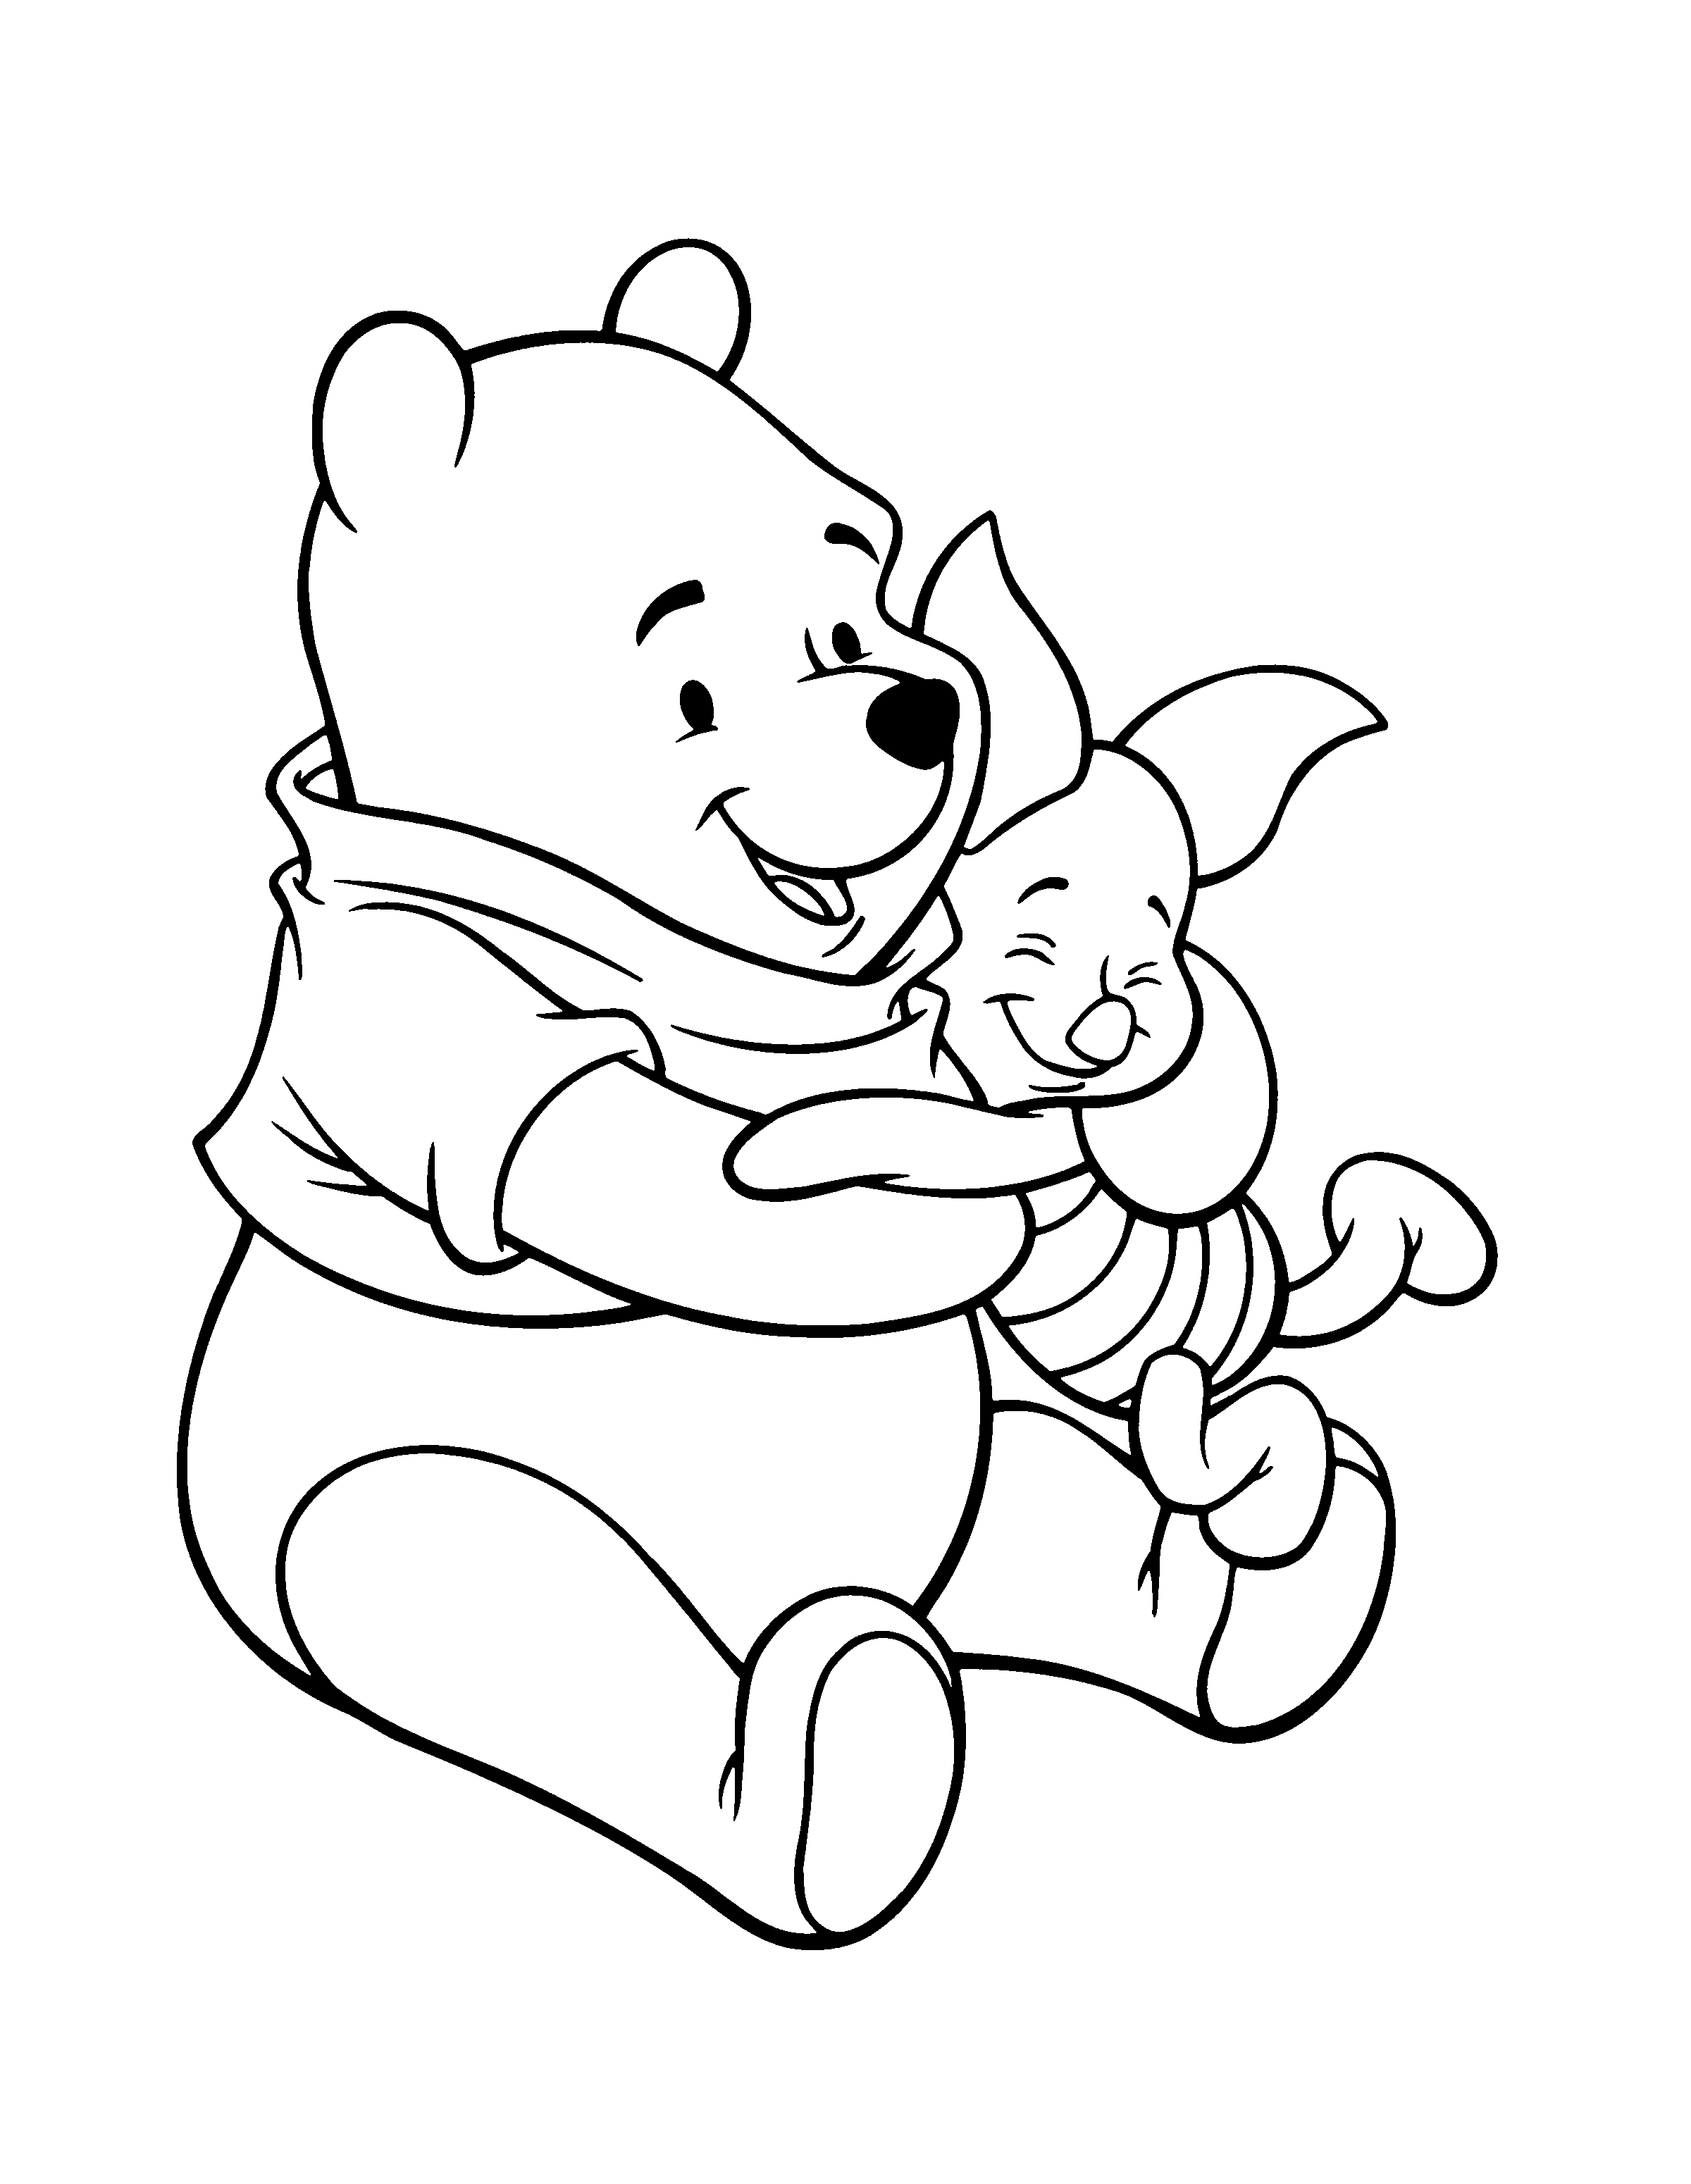 winnie-the-pooh-coloring-pages-coloringpages1001